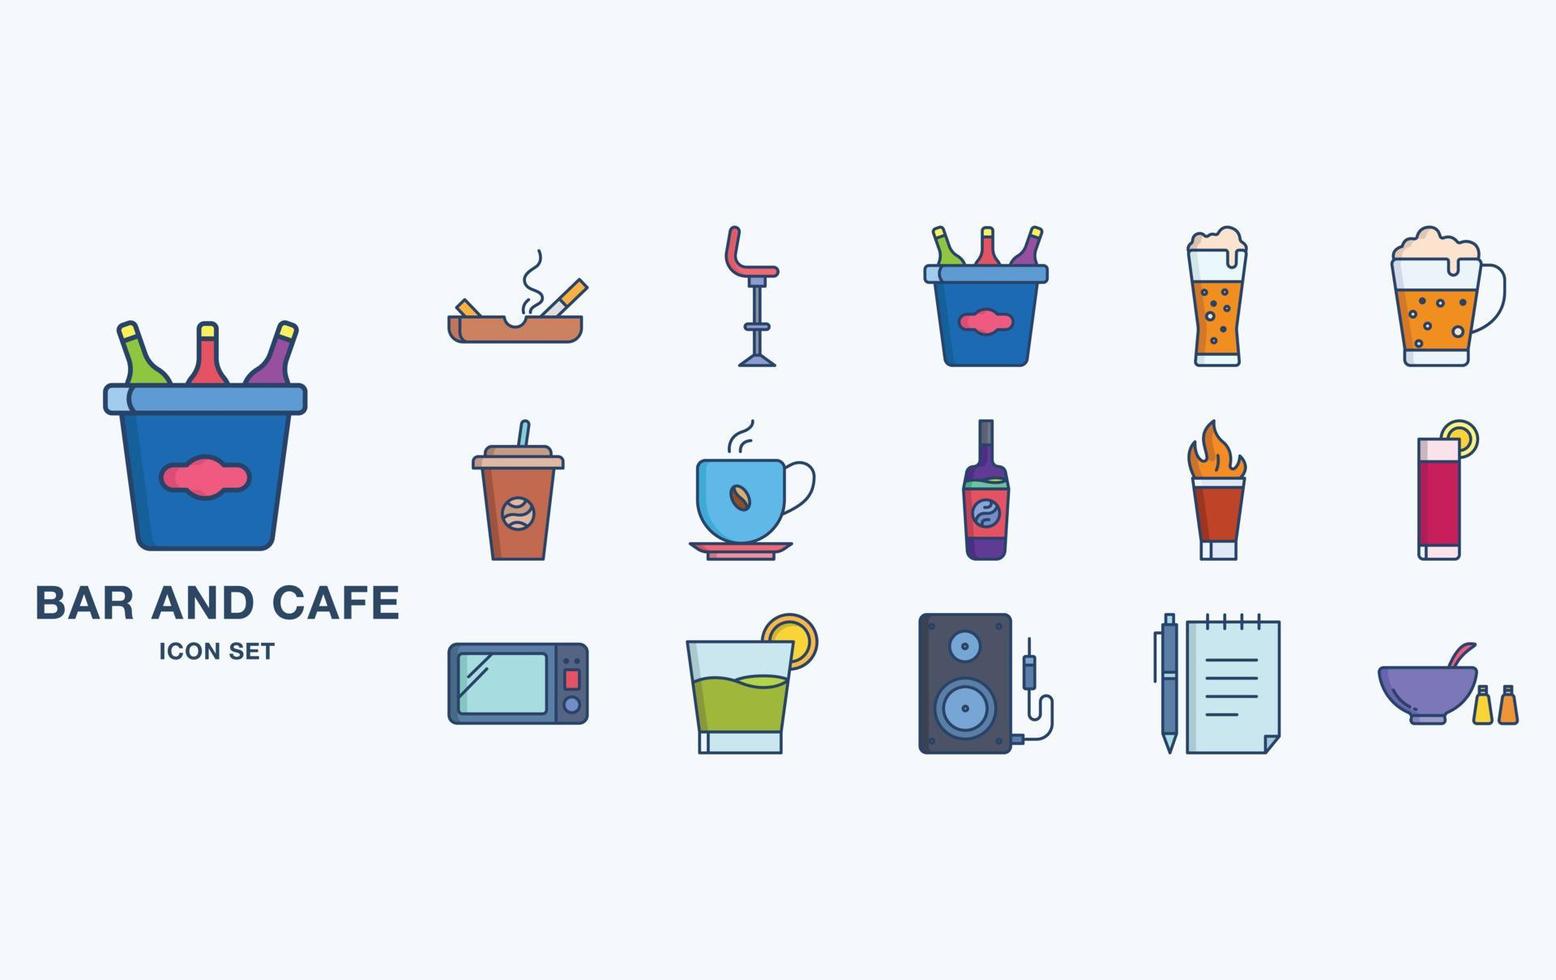 Bar and Cafe icon set, restaurant objects vector